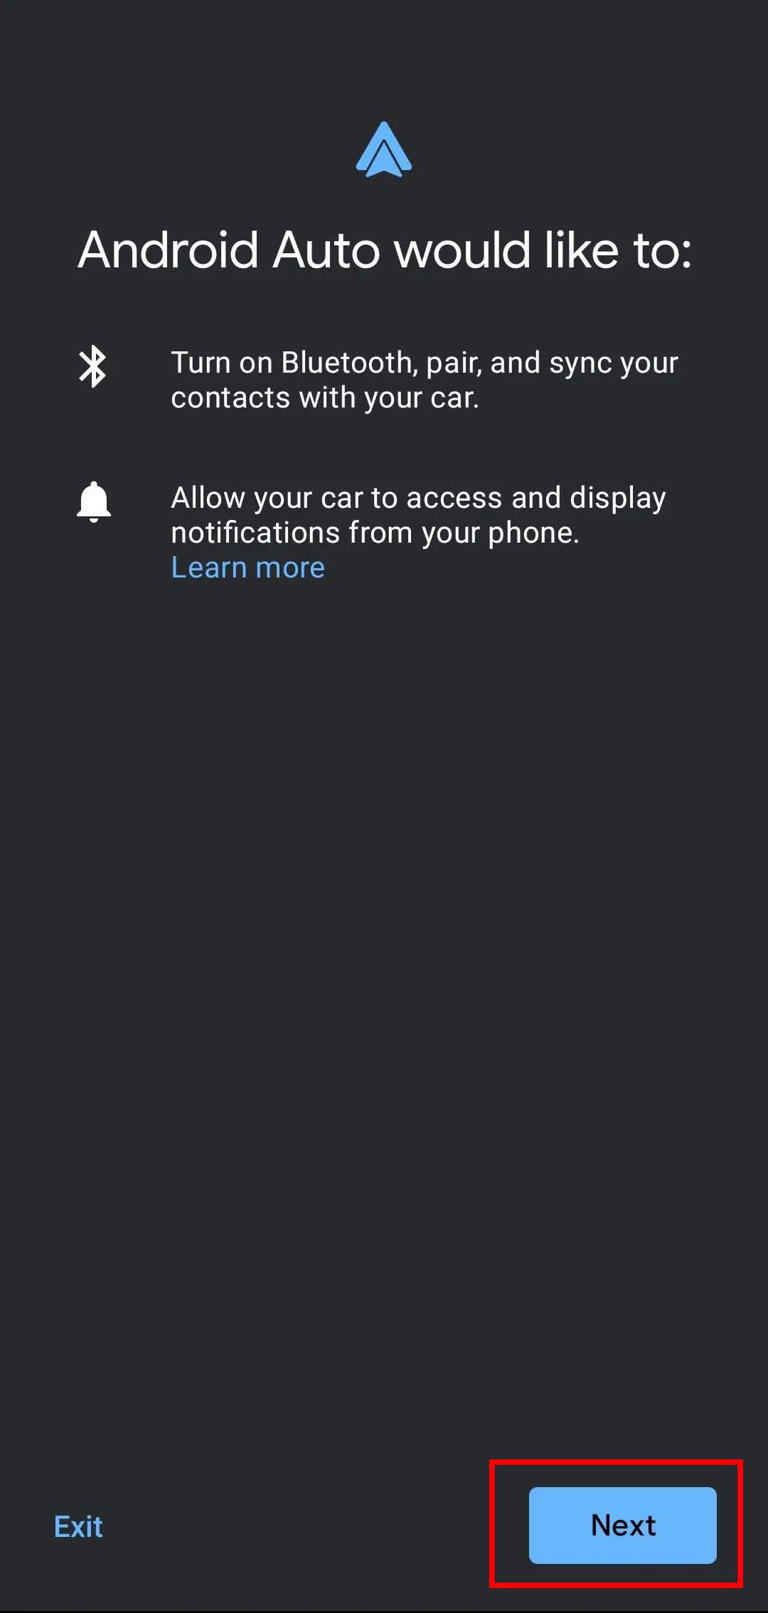 A setup screen for Android Auto is displayed, requesting permission to turn on Bluetooth, pair and sync contacts with the car, and allow the car to access and display notifications from the phone.